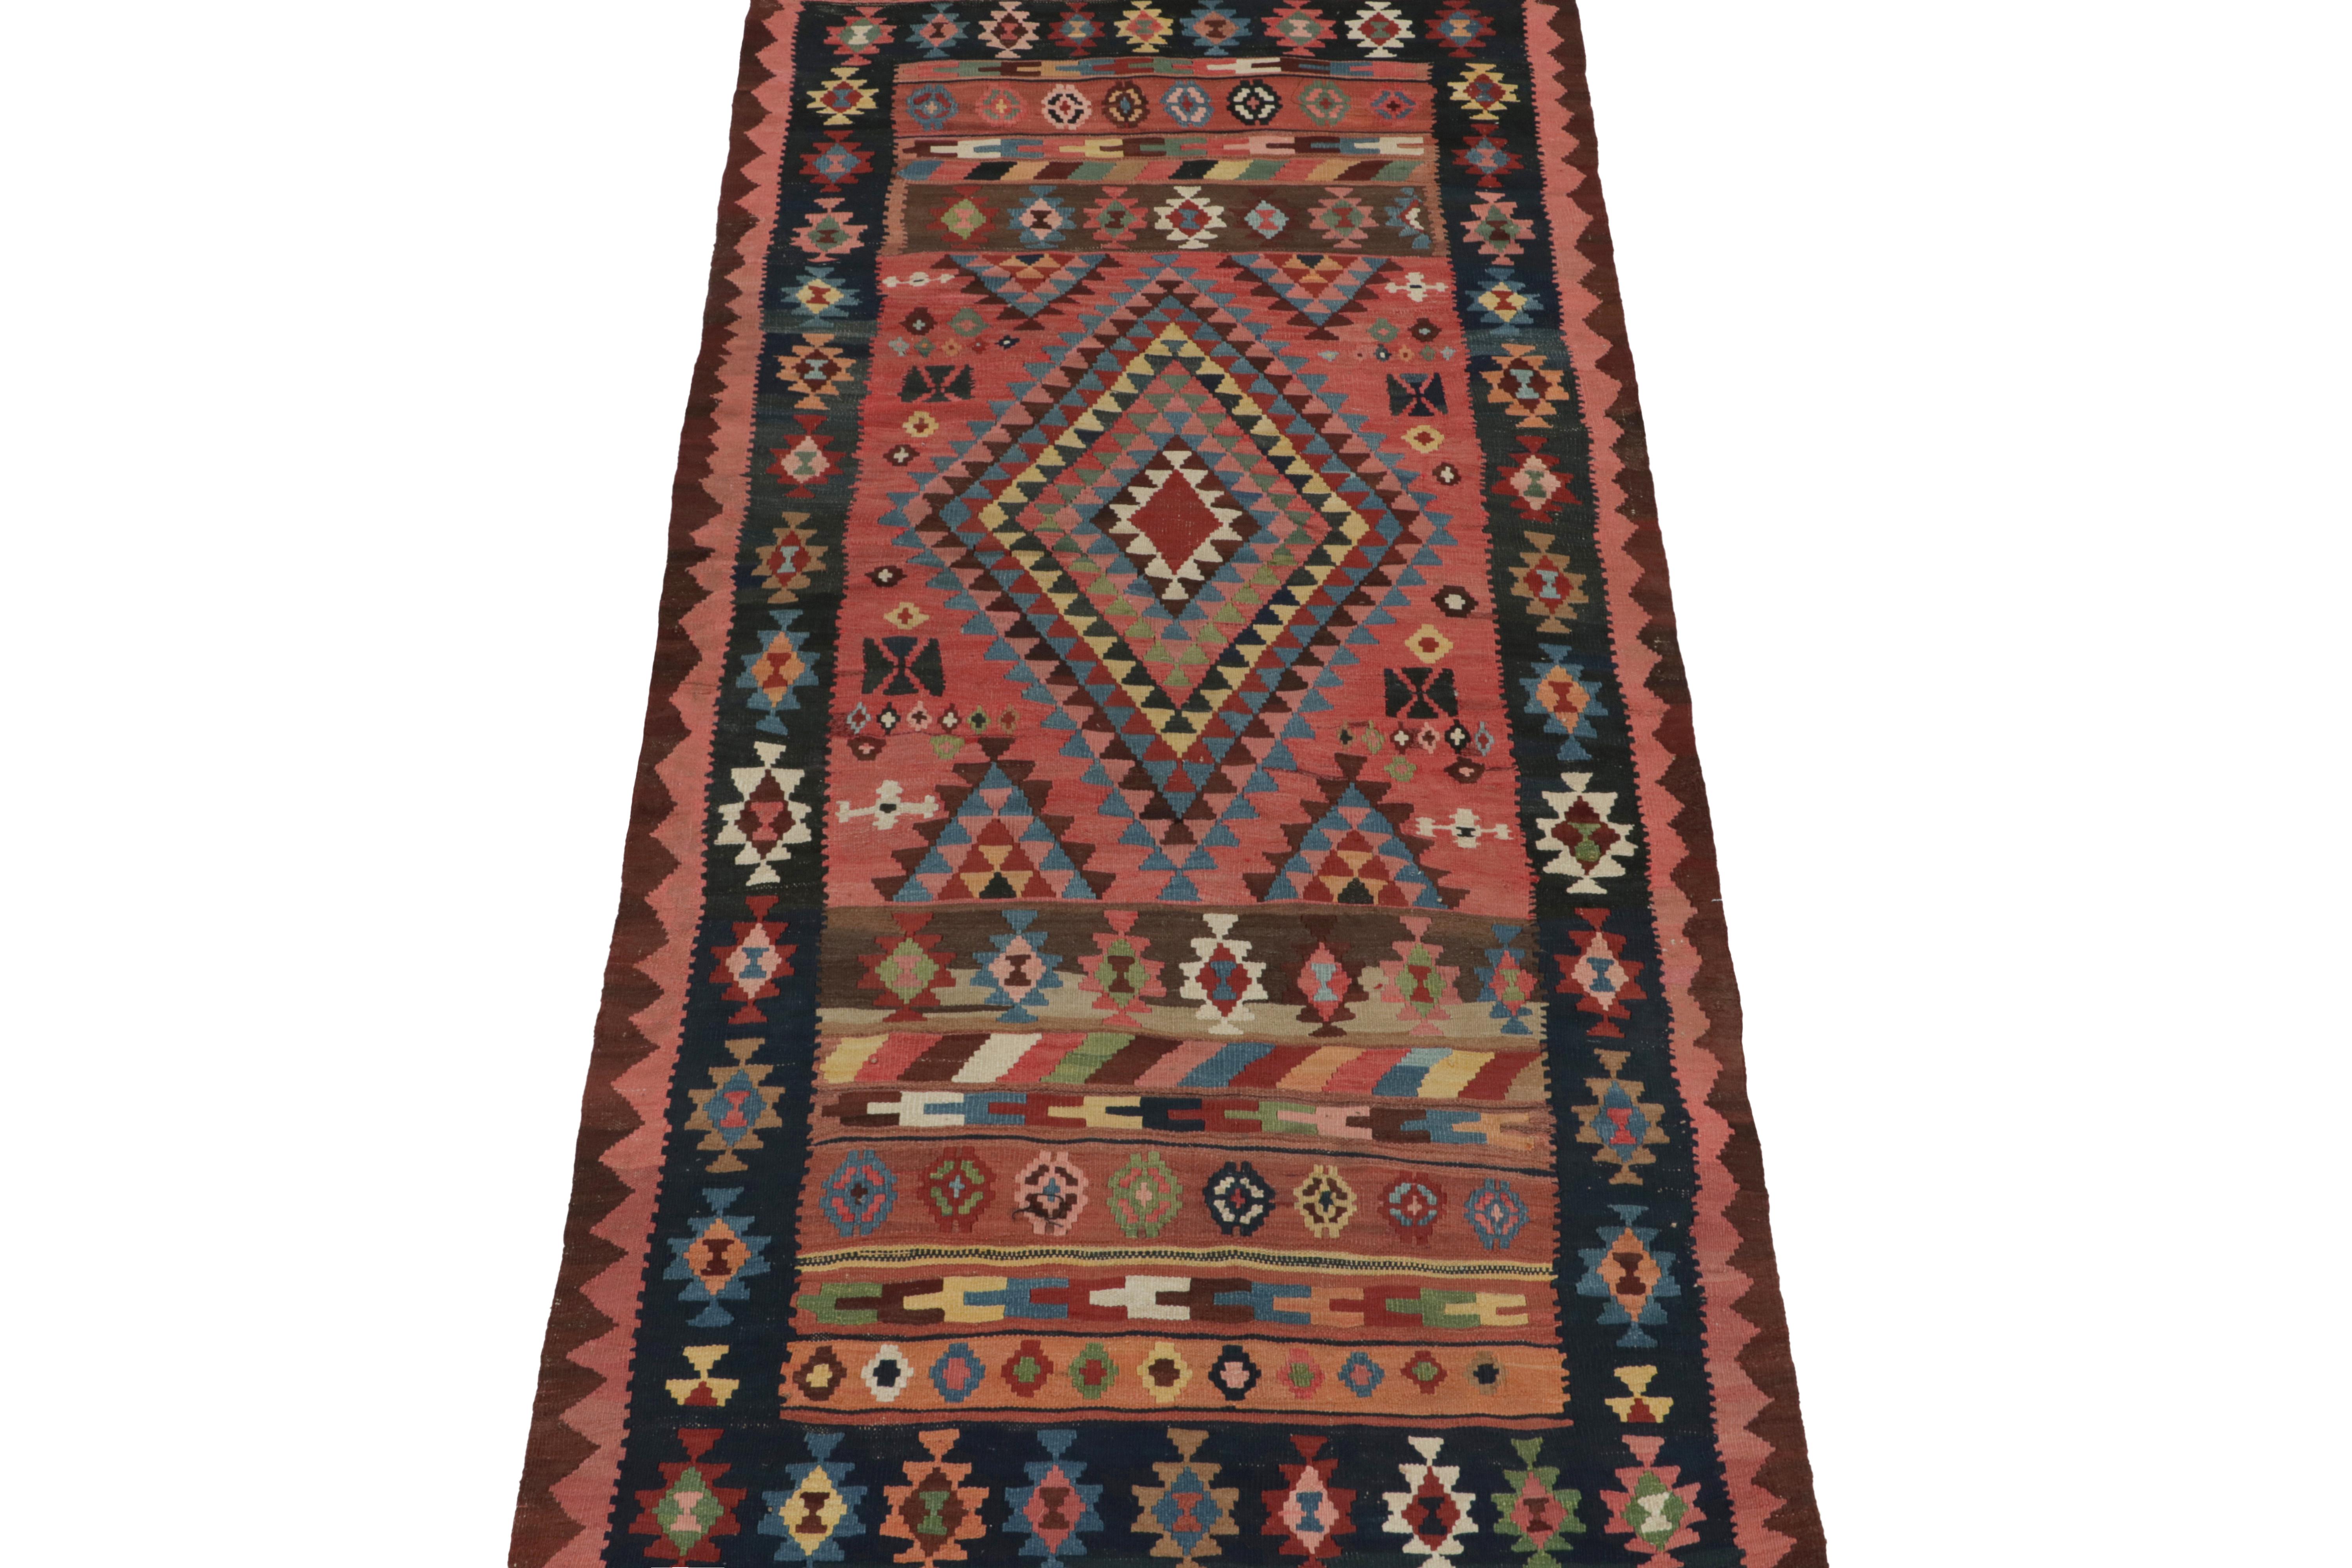 This vintage 5x10 Persian kilim is an especially rare tribal rug for its period—handwoven in wool circa 1950-1960.

Further on the Design:

The open field hosts a medallion with a rare emphasis on pale pink with orange, brown, and blue patterns